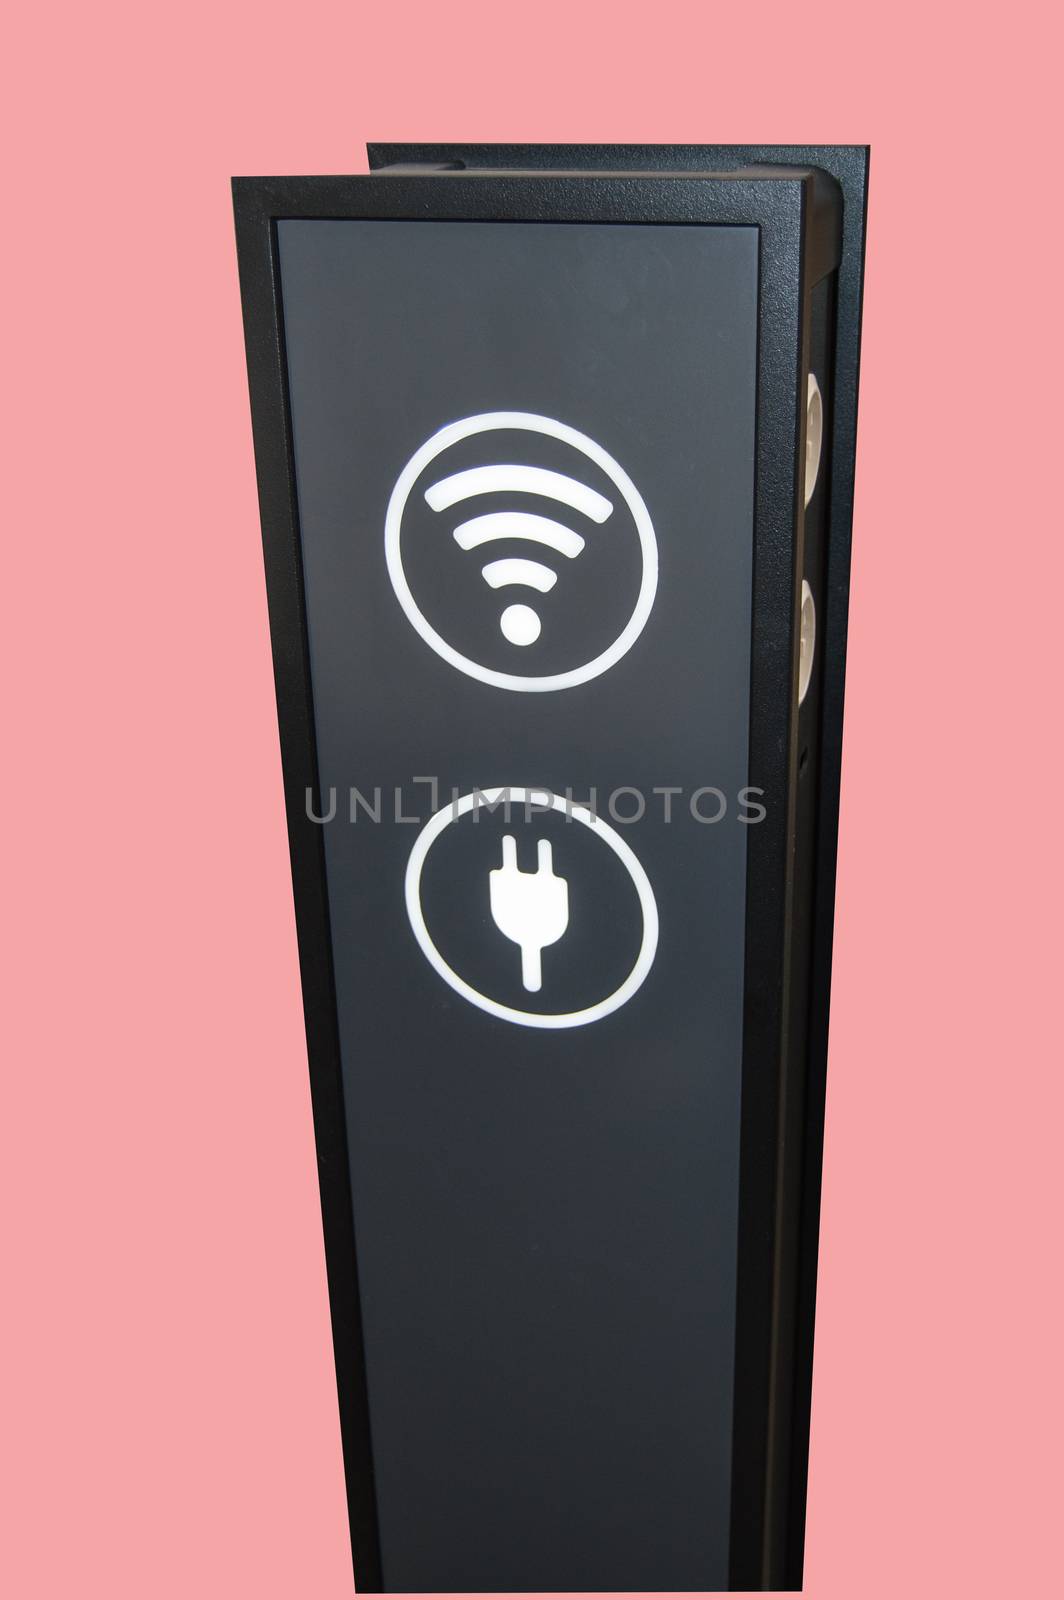 Stand tower for charging mobile phones in shopping Mall, wifi zone sign isolated on pink background by clipping, vertical shot.